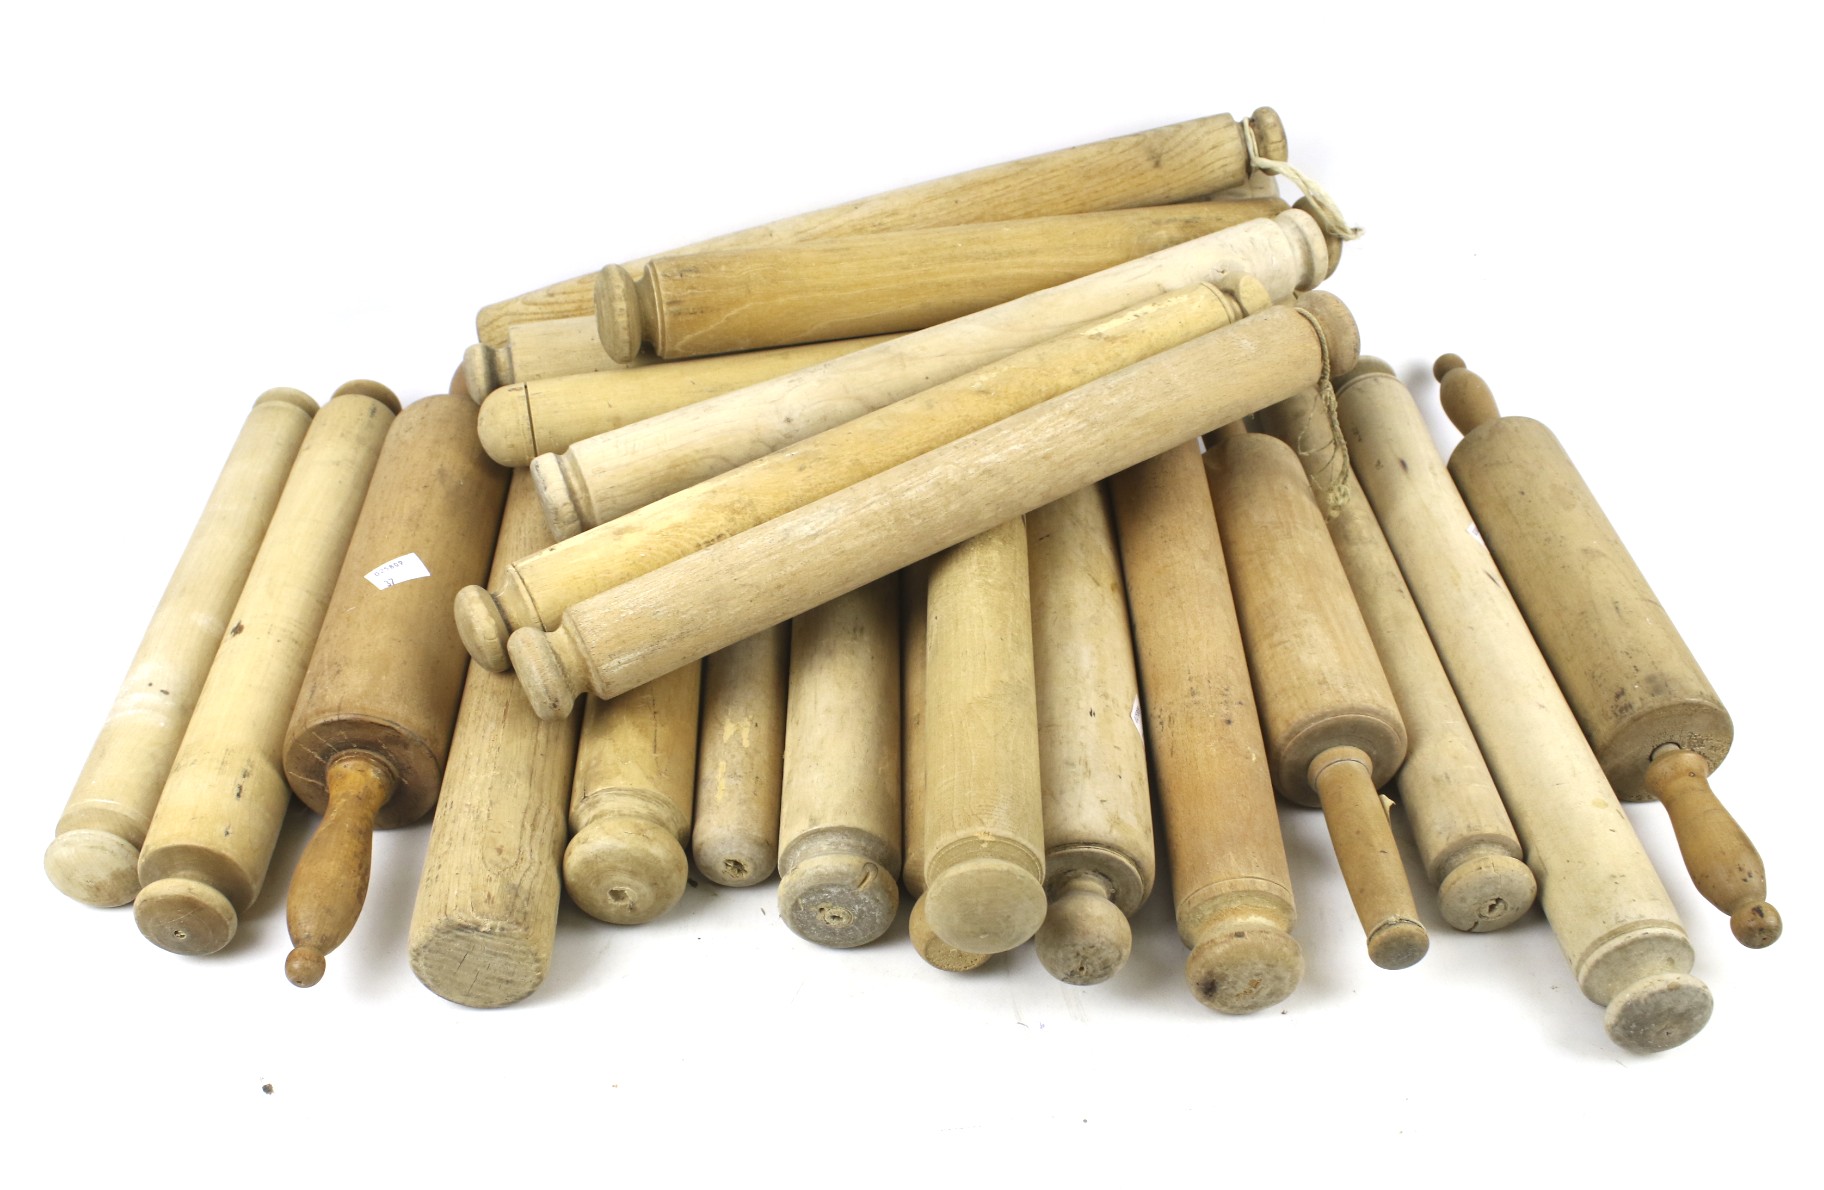 A collection of vintage wooden rolling pins.